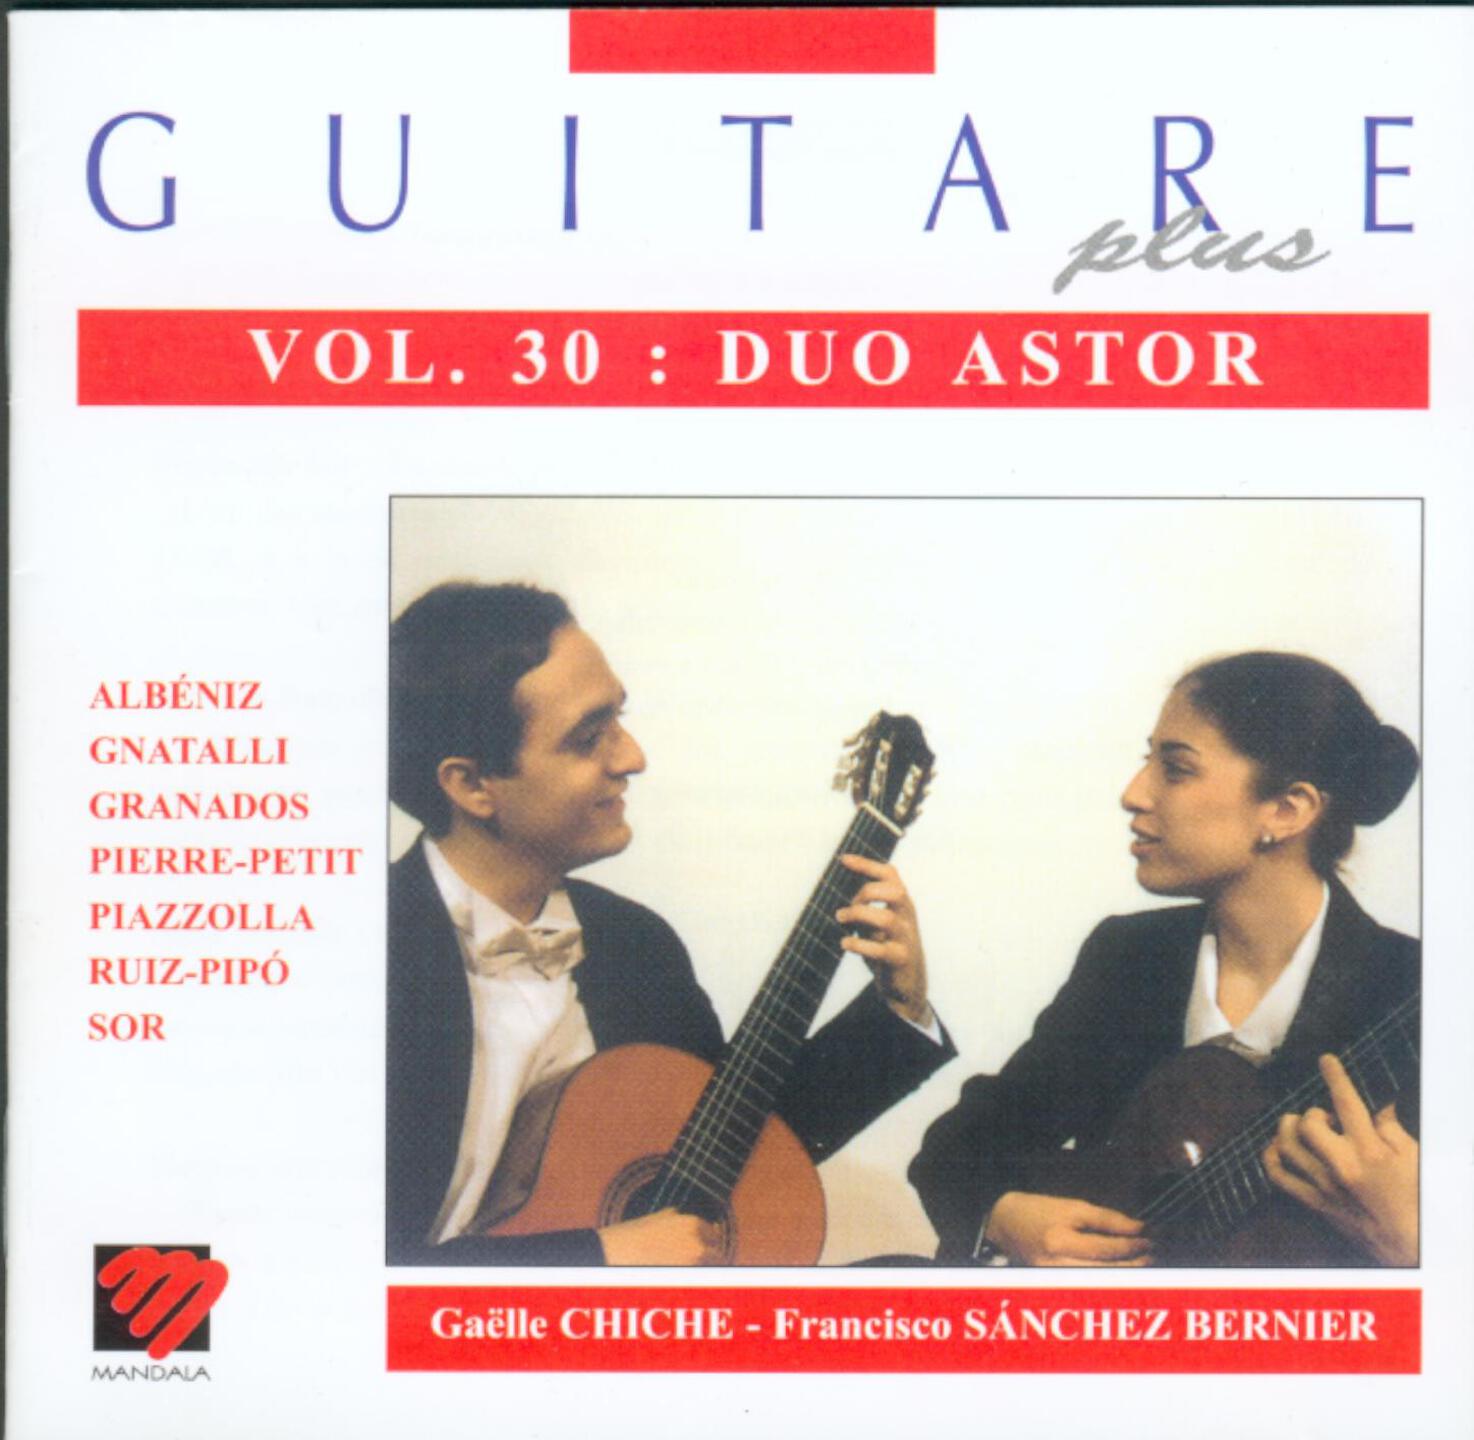 Volume 30 of the Collection guitare plus